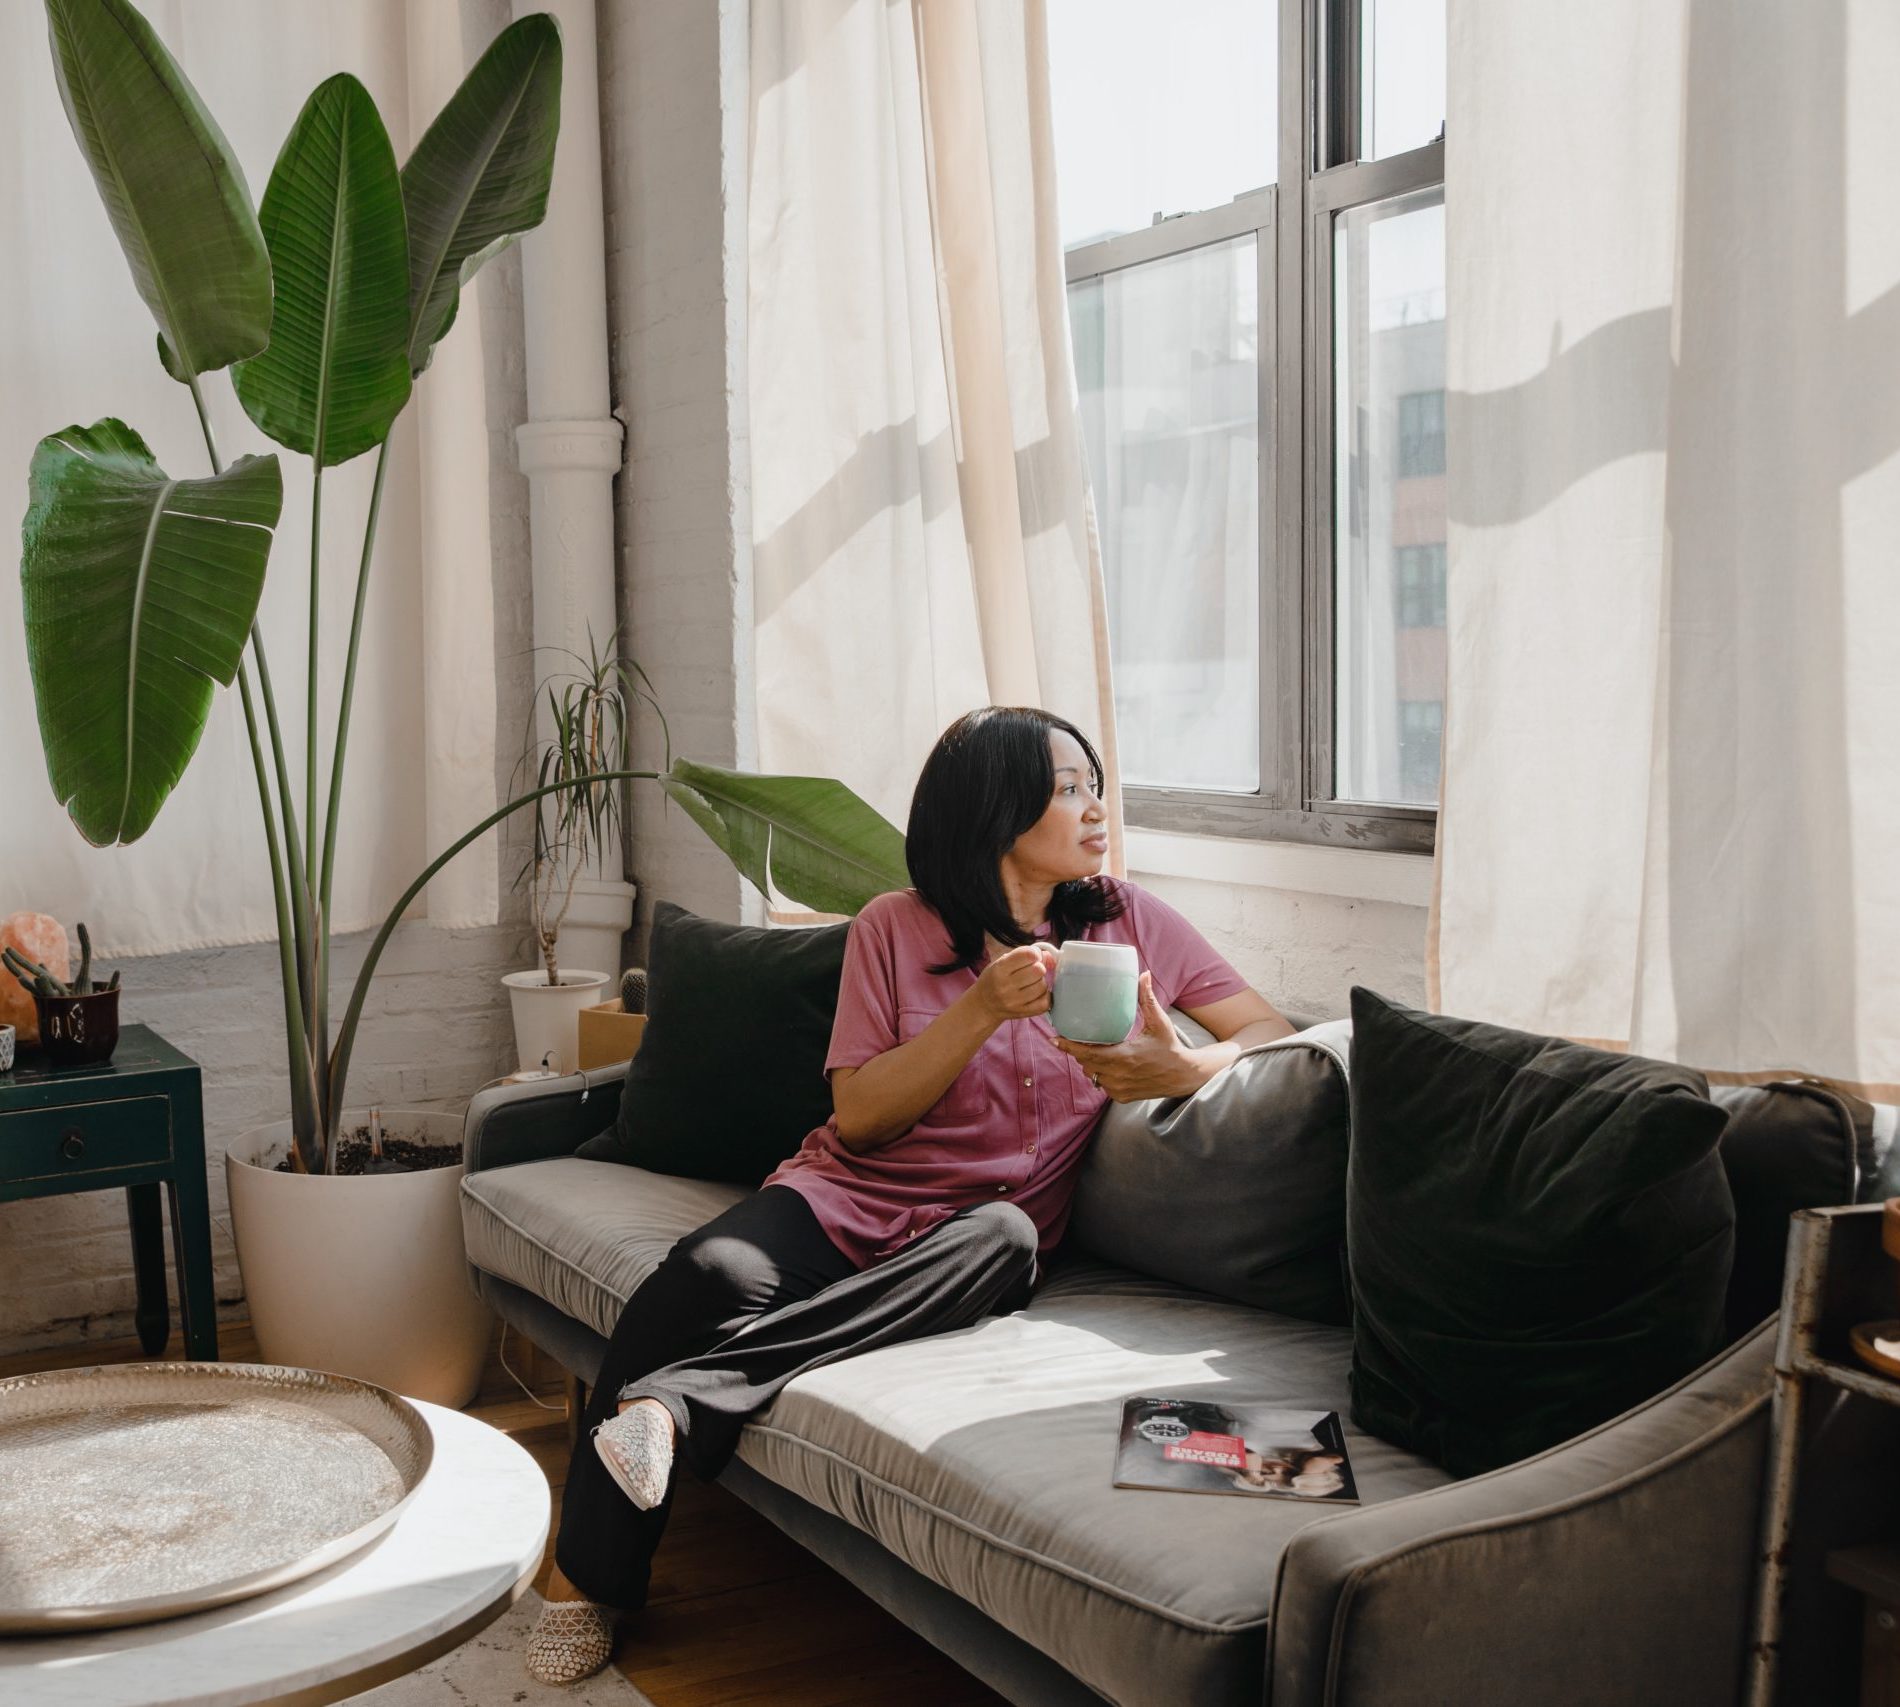 Woman sitting on couch drinking a cup of coffee and staring out of window.